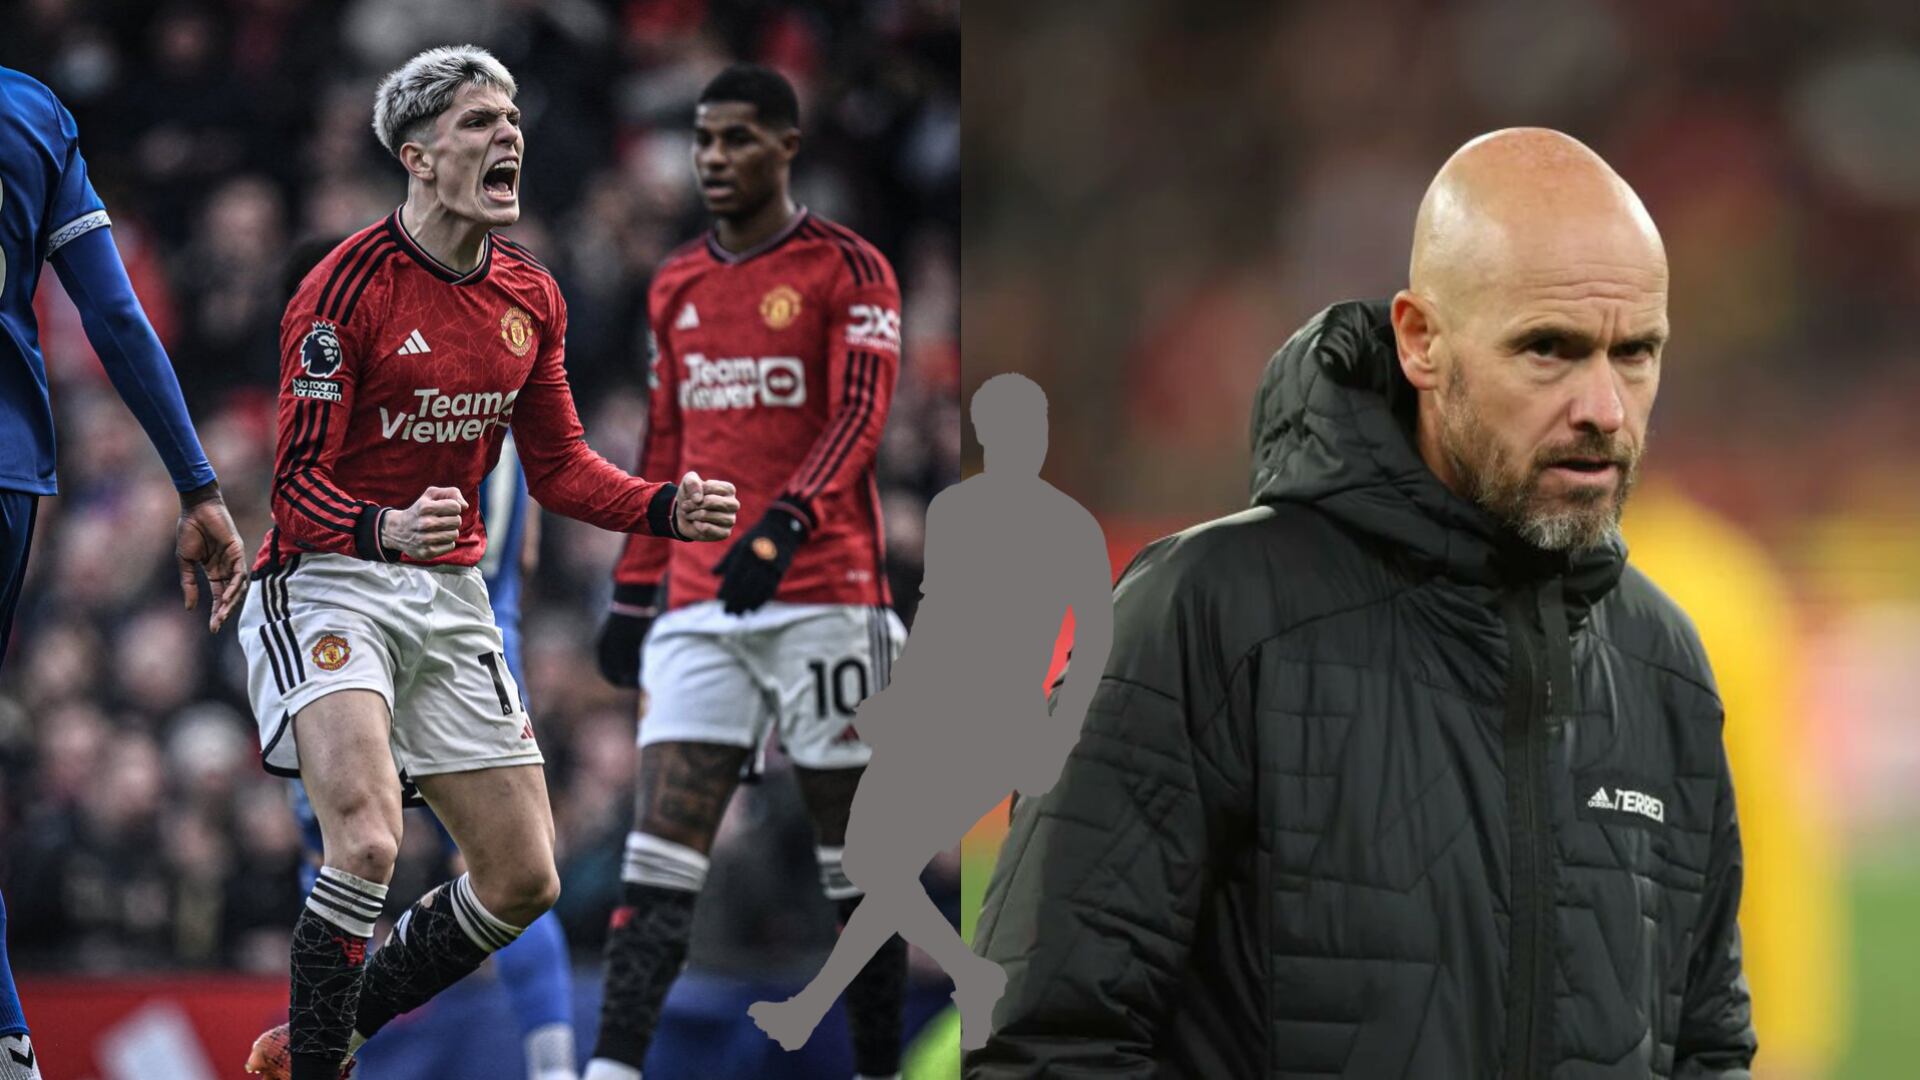 Not Garnacho, the Manchester United youngster Ten Hag sees high potential